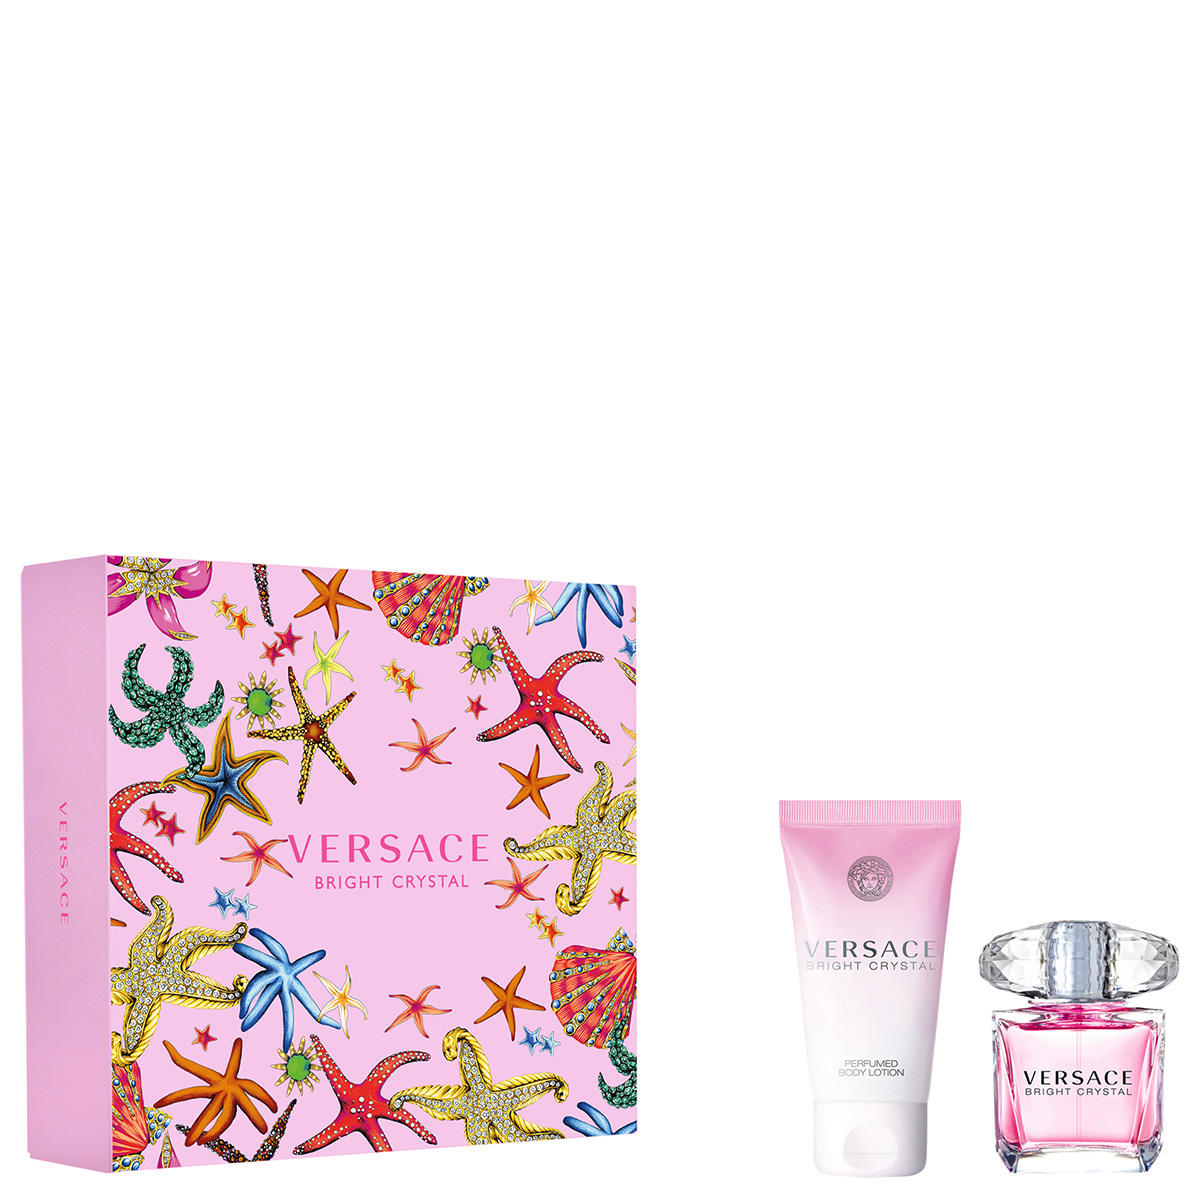 https://cdn.basler-beauty.de/out/pictures/generated/product/1/1200_1200_100/2594226-Versace-Bright-Crystal-Bright-Crystal-Set.53b89328.jpg